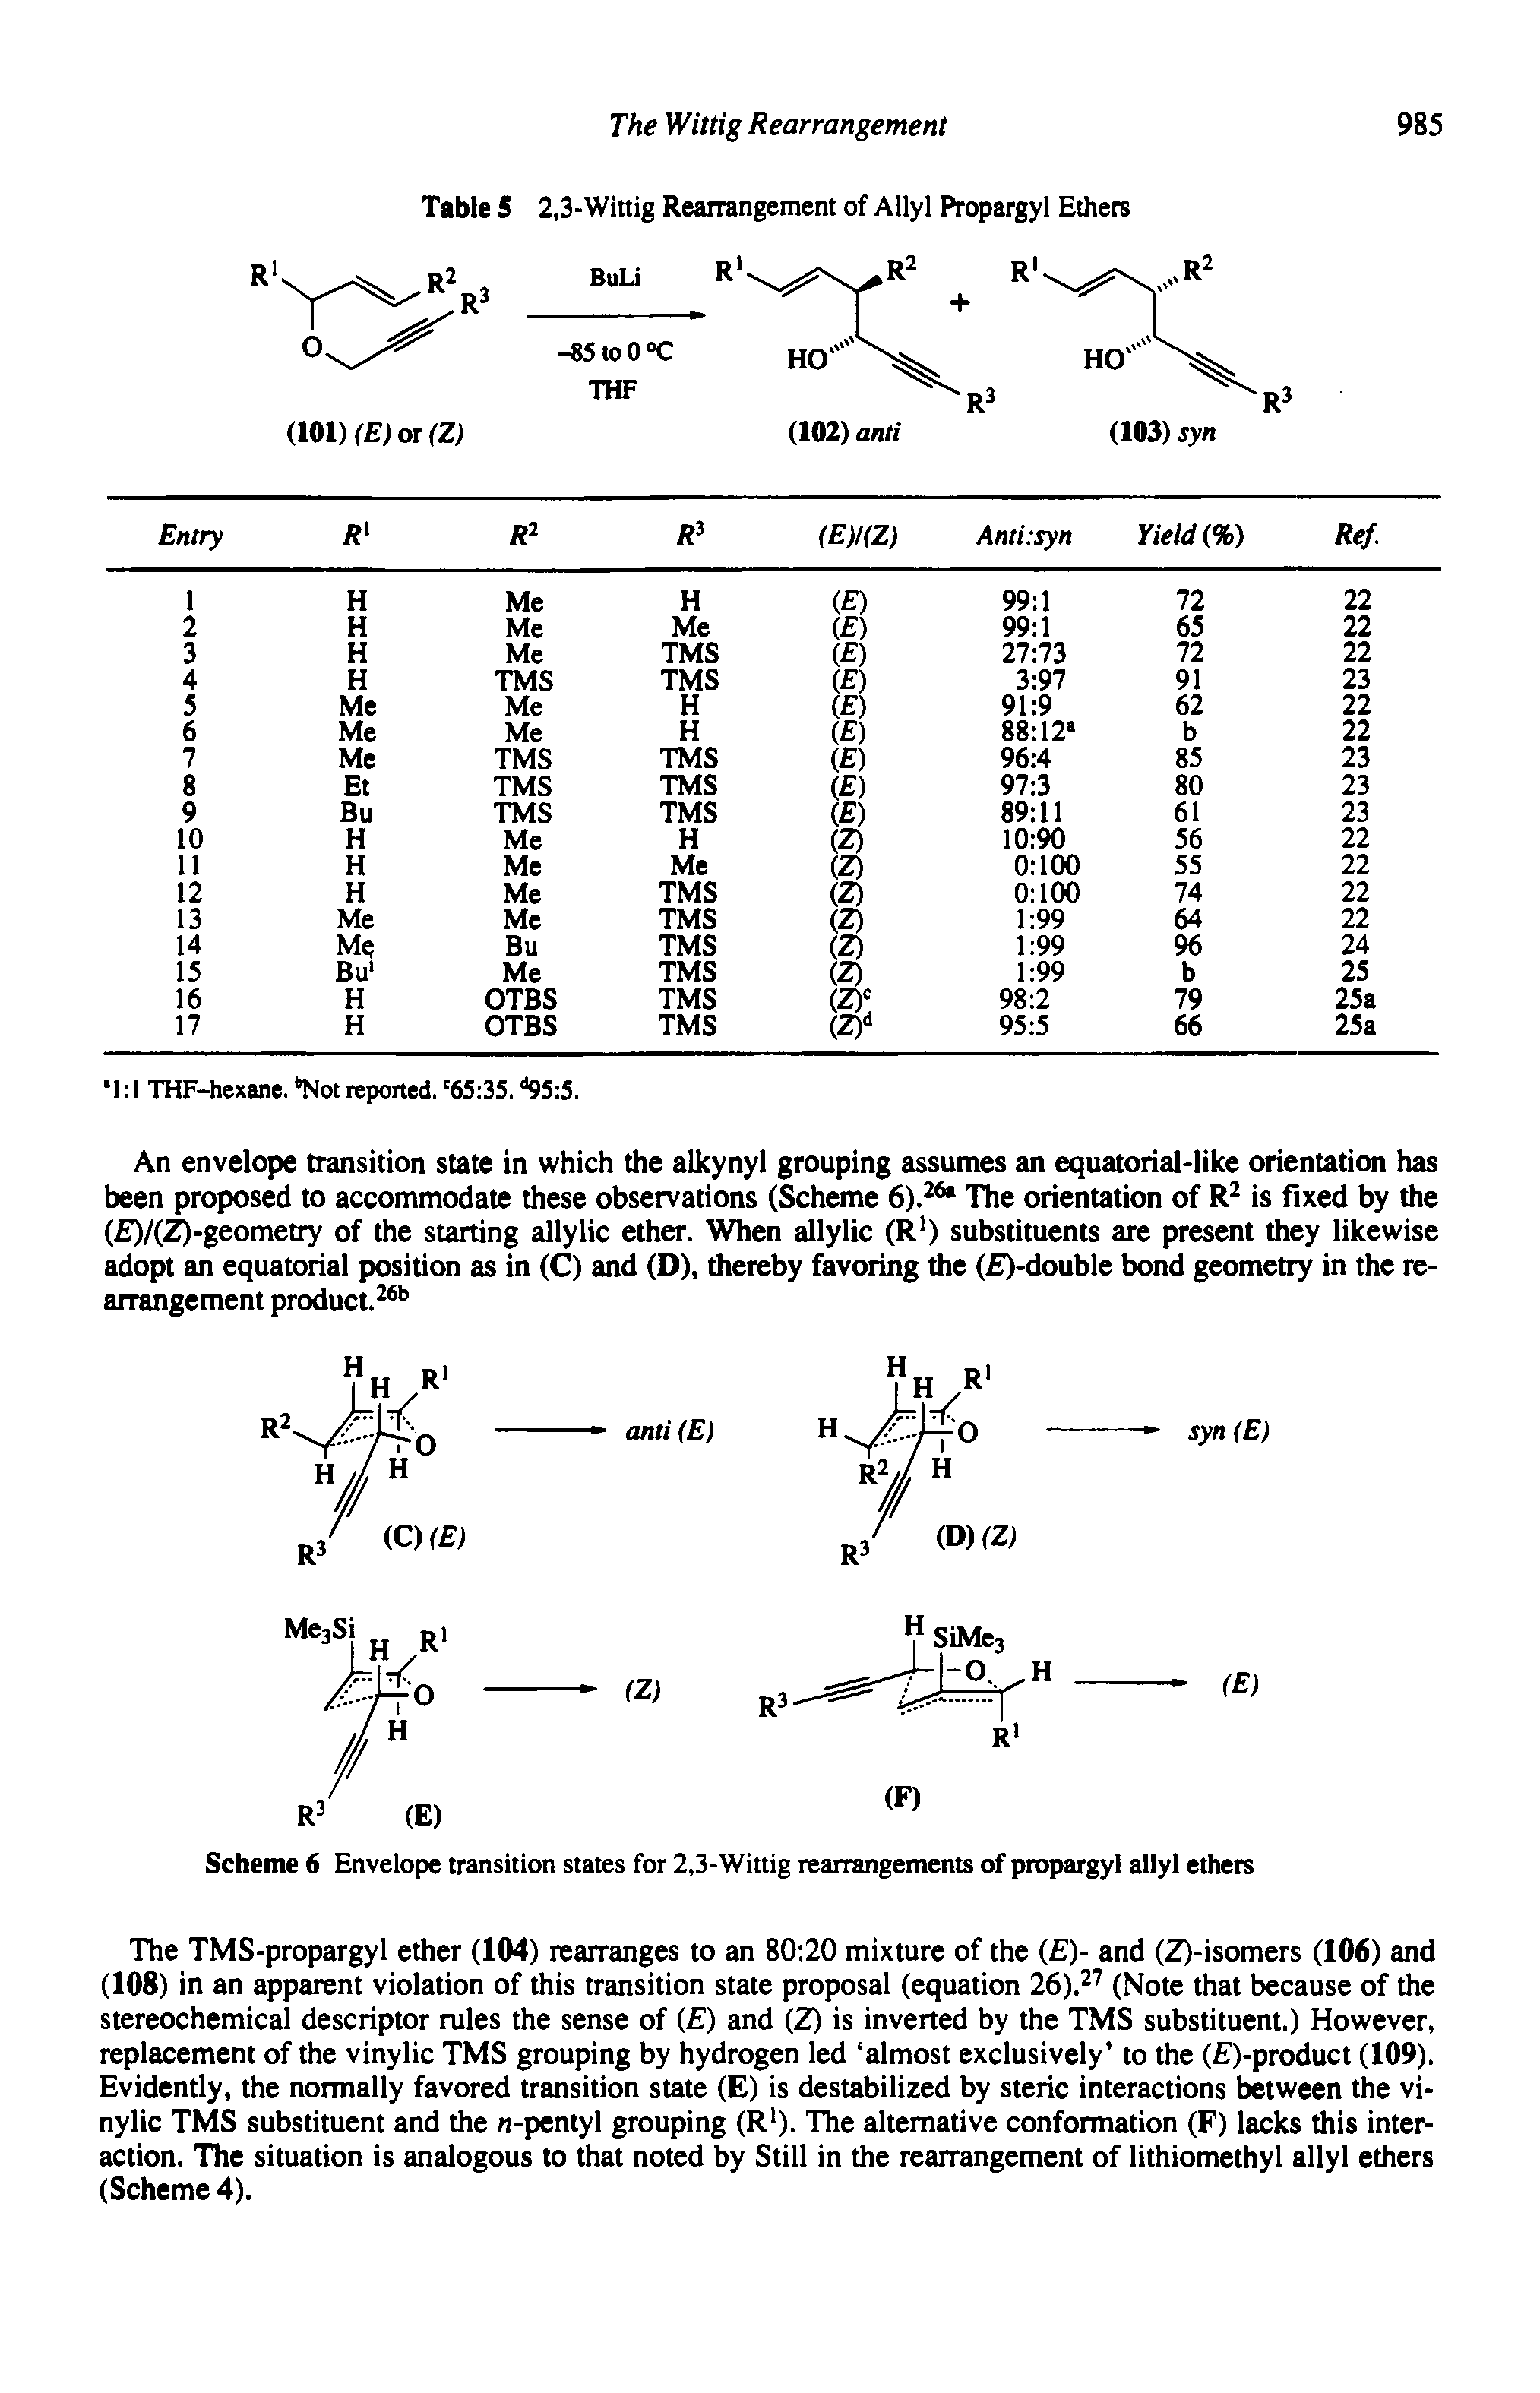 Scheme 6 Envelope transition states for 2,3-Wittig rearrangements of propargyl allyl ethers...